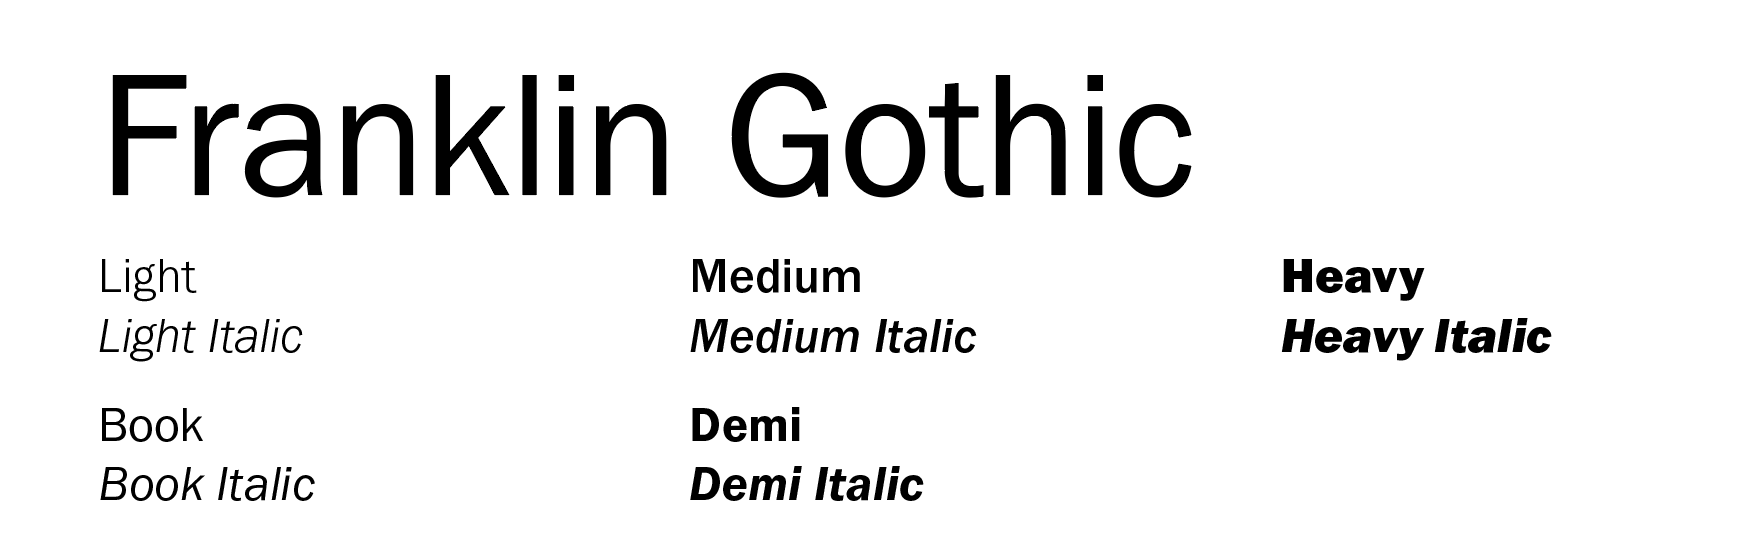 Franklin Gothic font examples